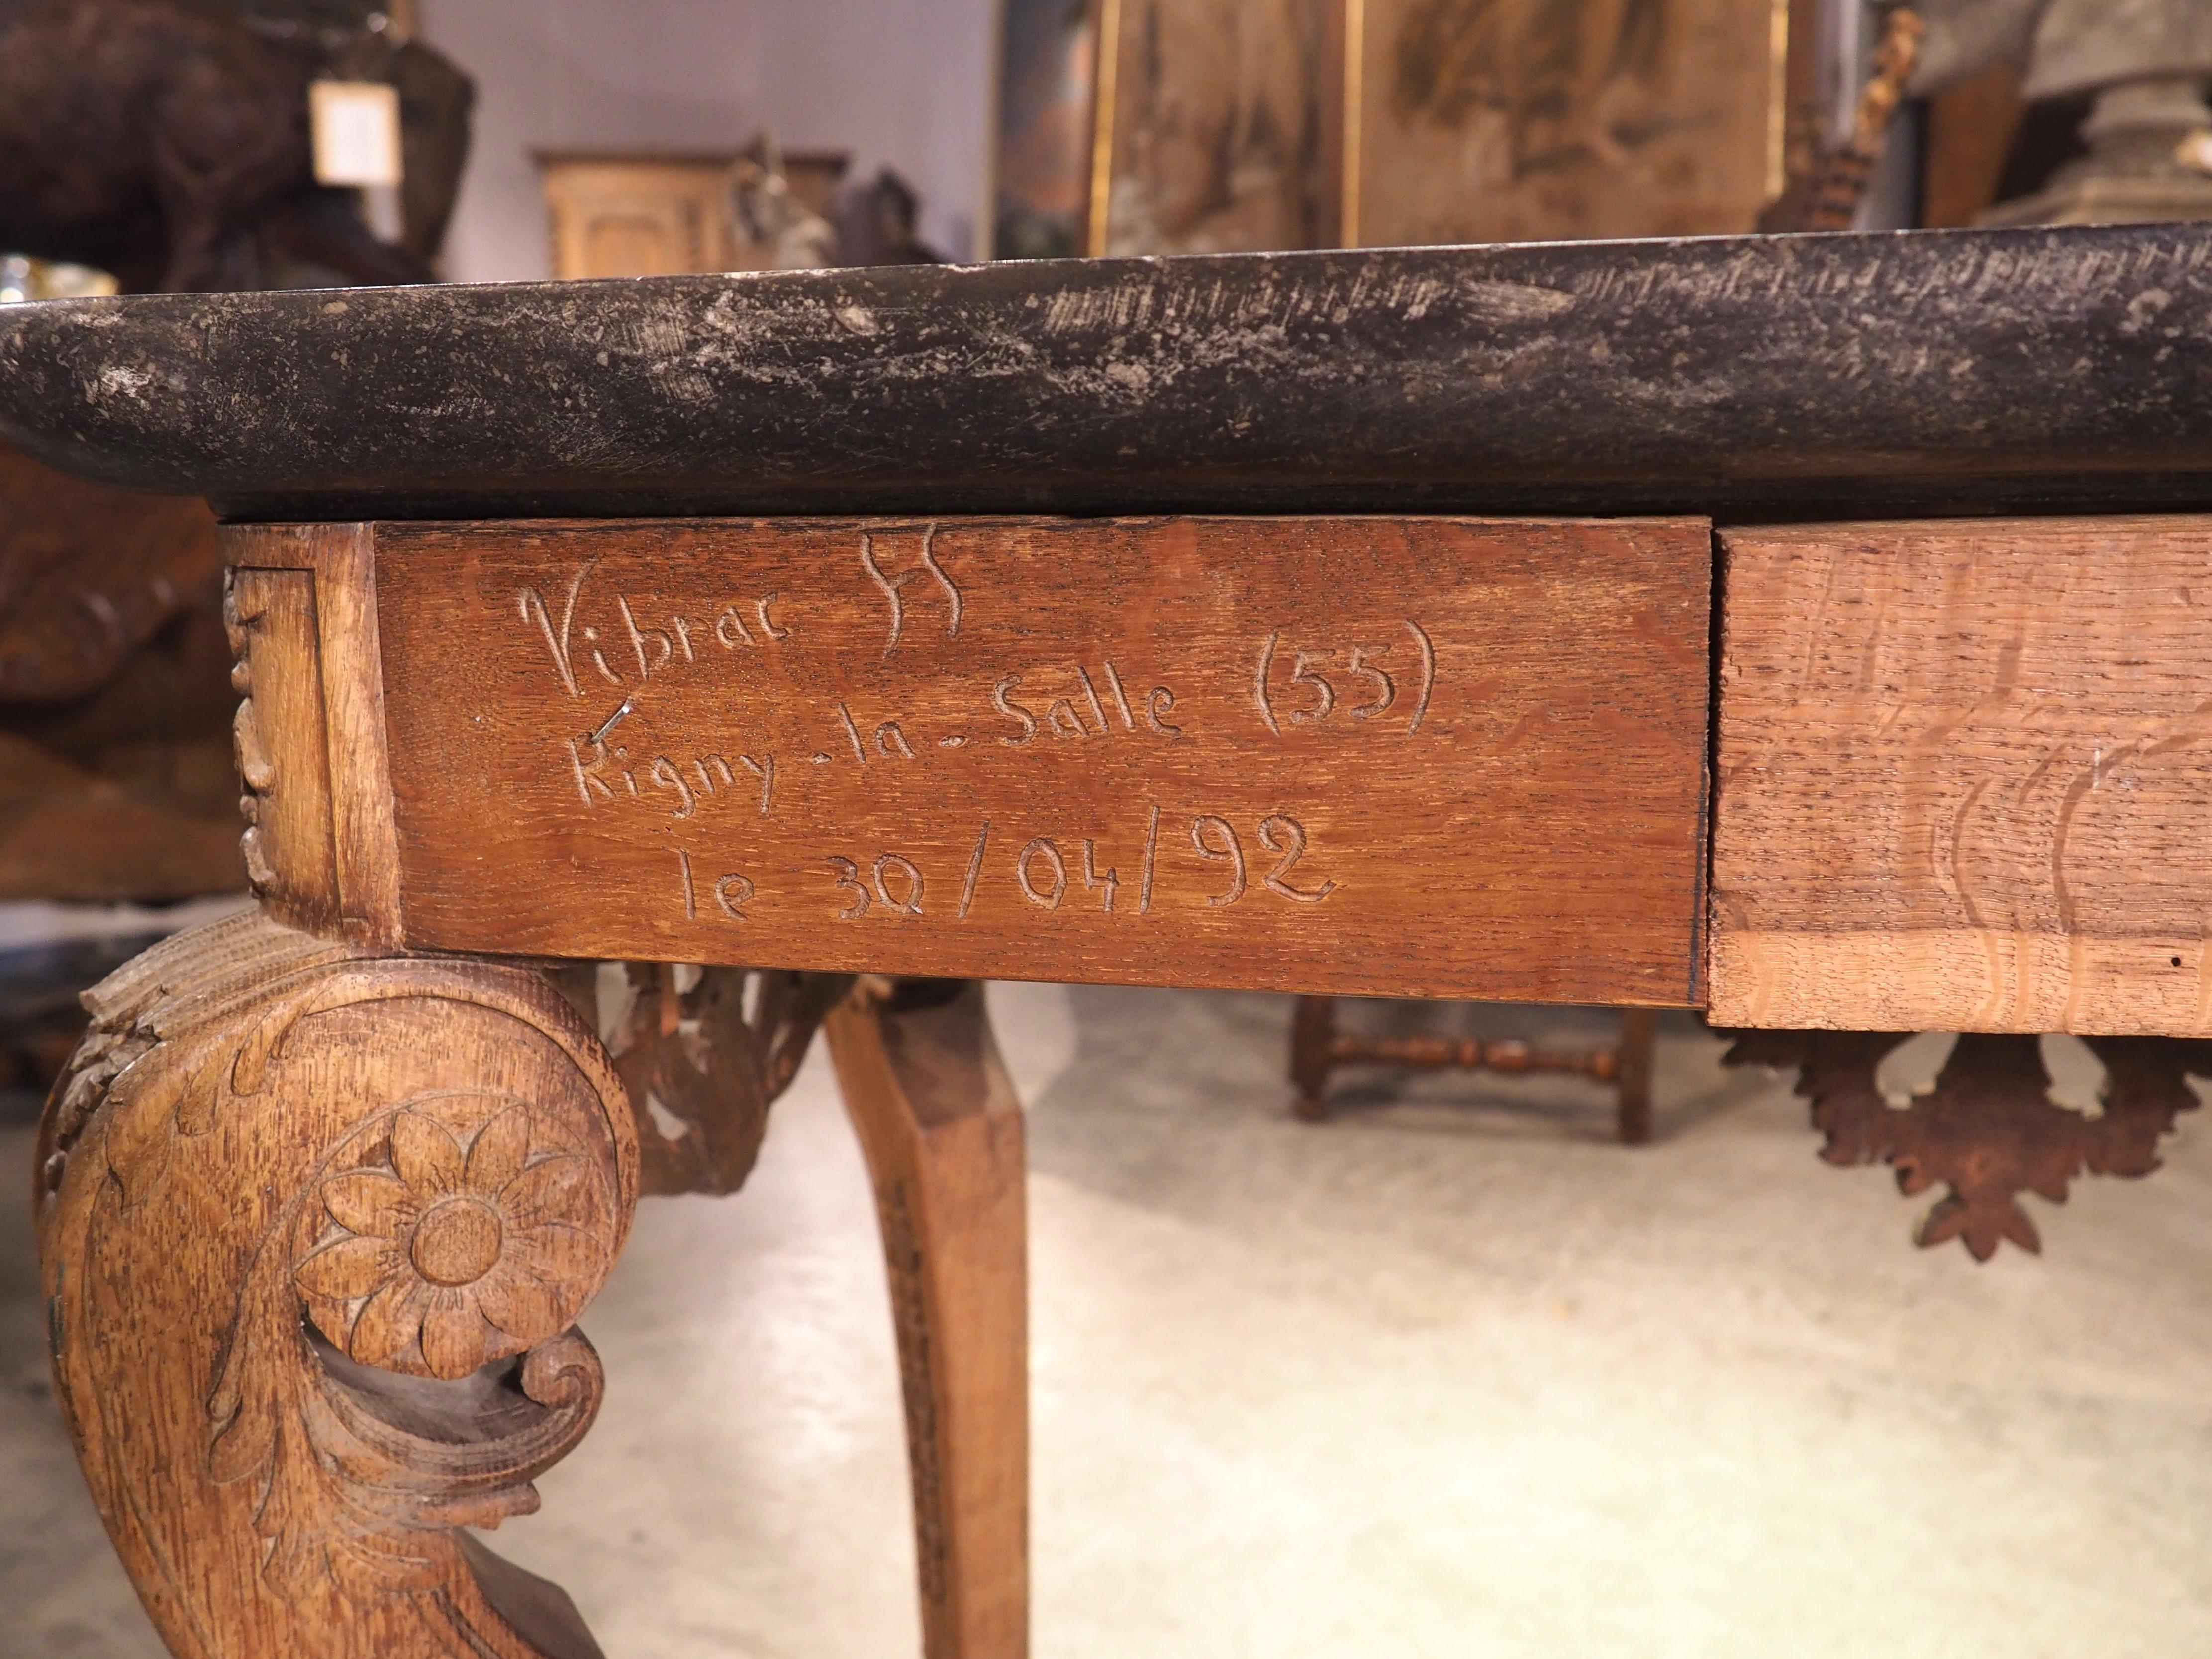 Hand-carved circa 1850 in the northern reaches of France, known as French Flanders, this oak console or “table a Gibier” has a lovely black bluestone top with white and gray veining. The 1 ½ inch thick top, which has an inverted quarter-round